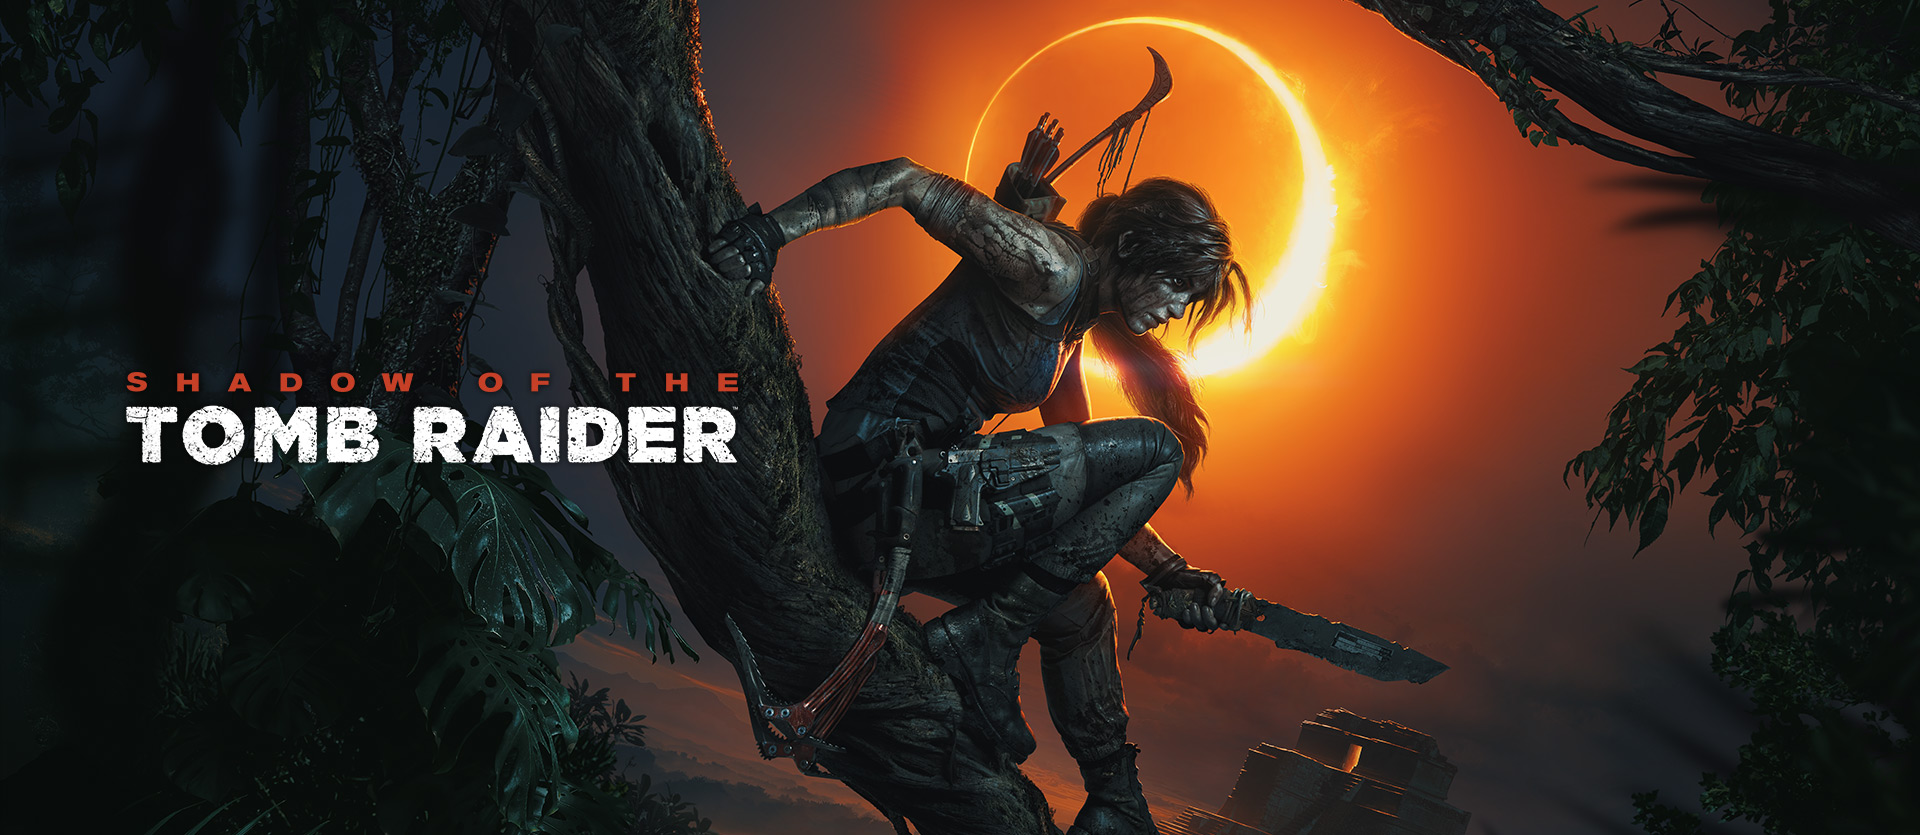 Shadow of the tomb raider free download pc